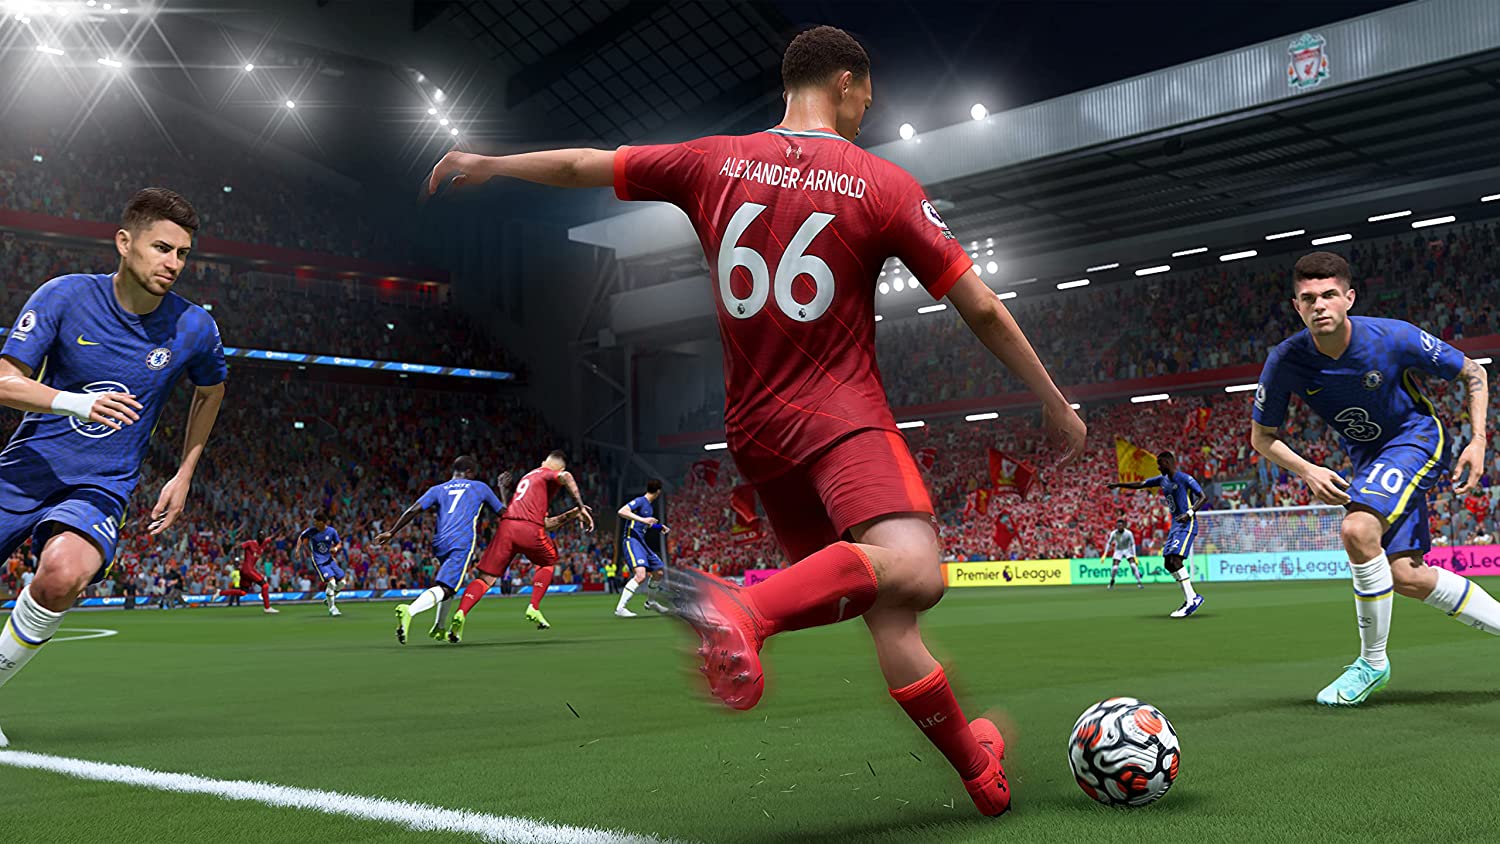 Fifa 22 Standard Edition On Ps4™ “Region 1” - Level UpEAPlaystation Video Games14633376753